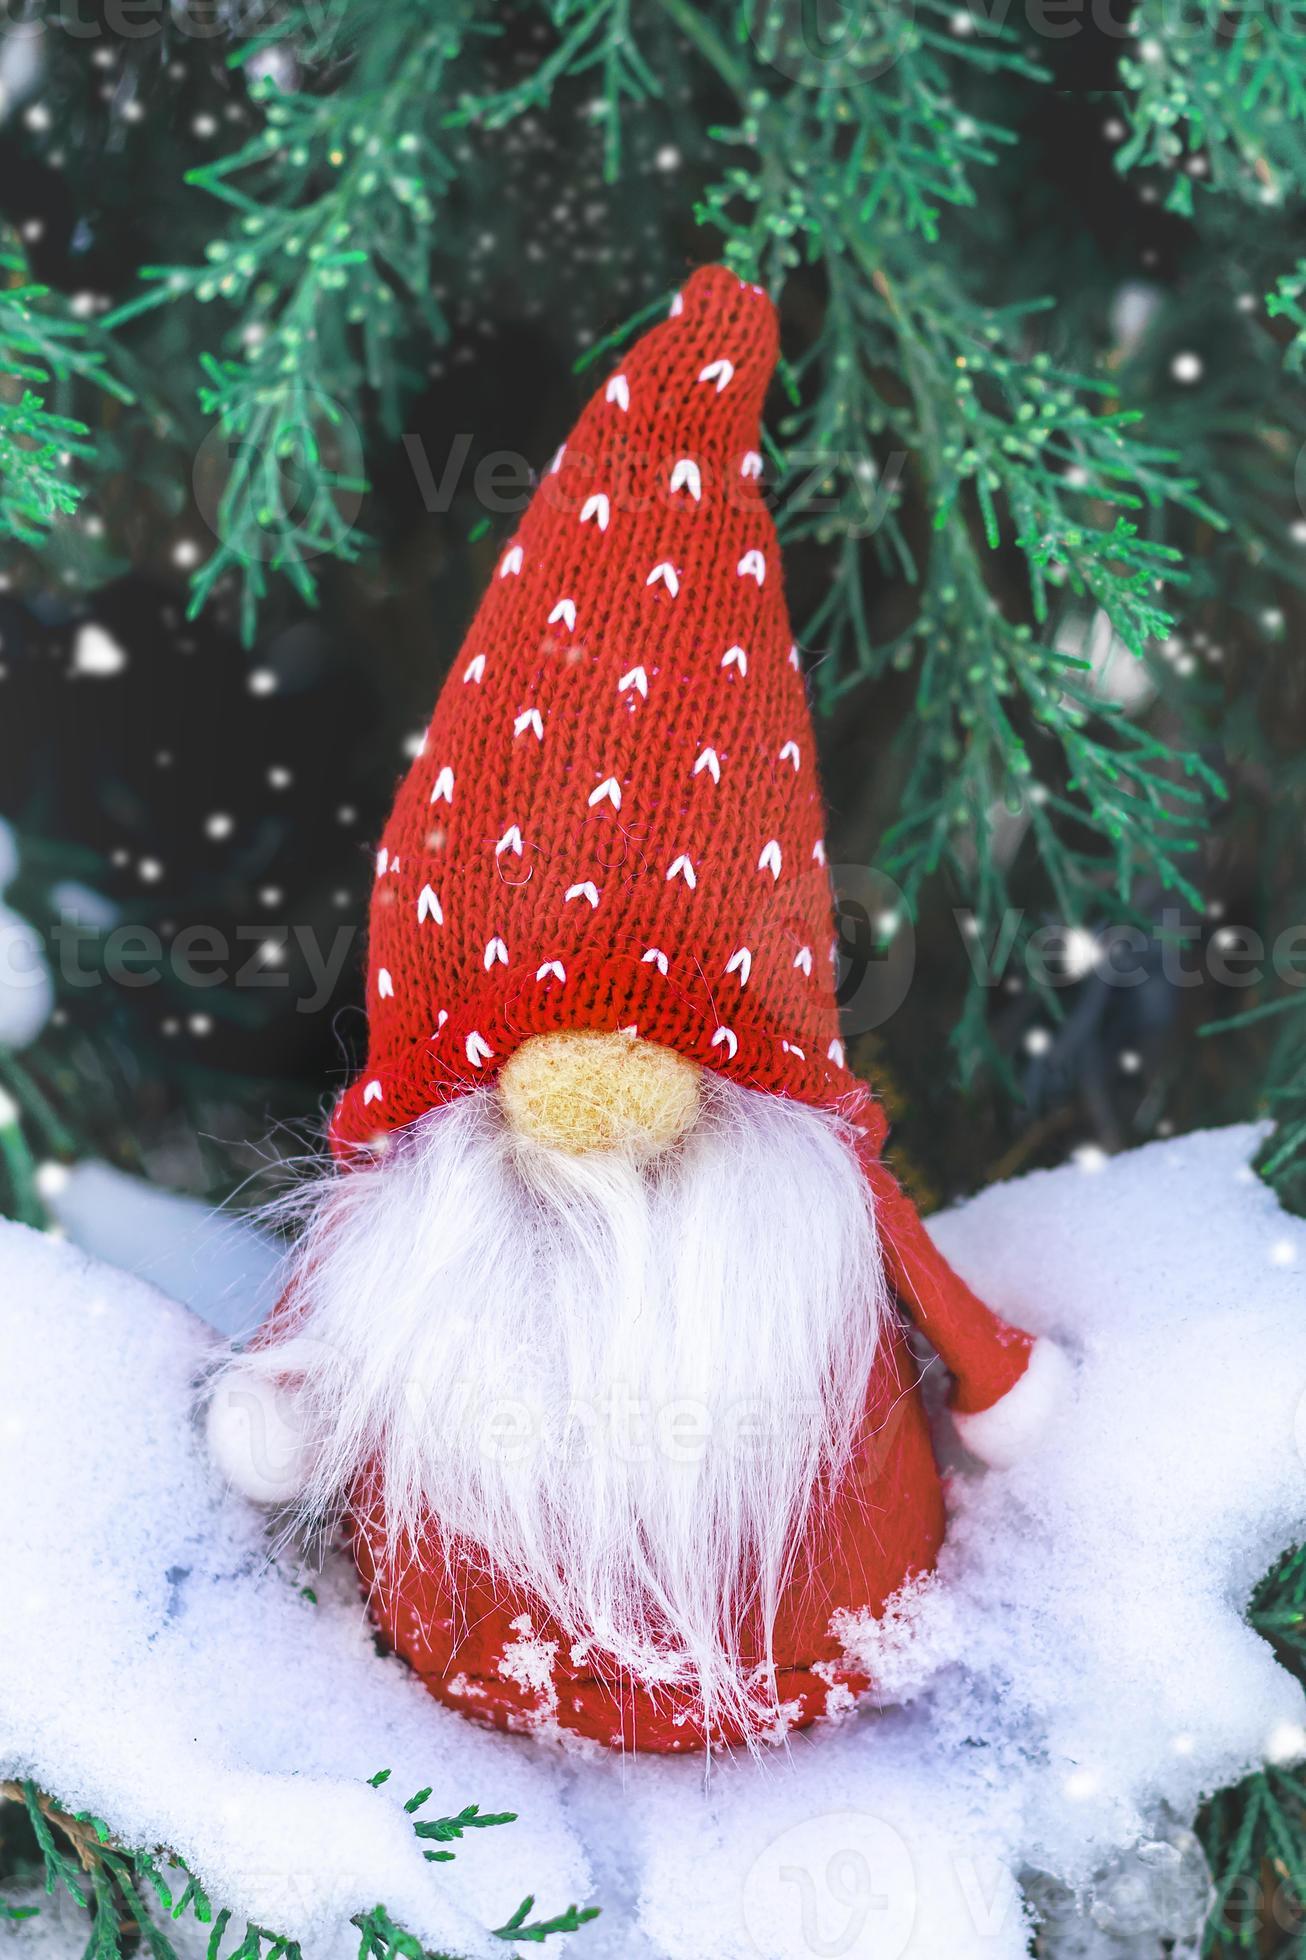 https://static.vecteezy.com/system/resources/previews/015/706/148/large_2x/christmas-holiday-card-cute-scandinavian-gnomes-with-red-hat-and-white-beard-on-snowy-winter-bench-fairytale-snowfall-wintertime-hello-december-january-february-concept-happy-new-year-christmas-photo.jpg